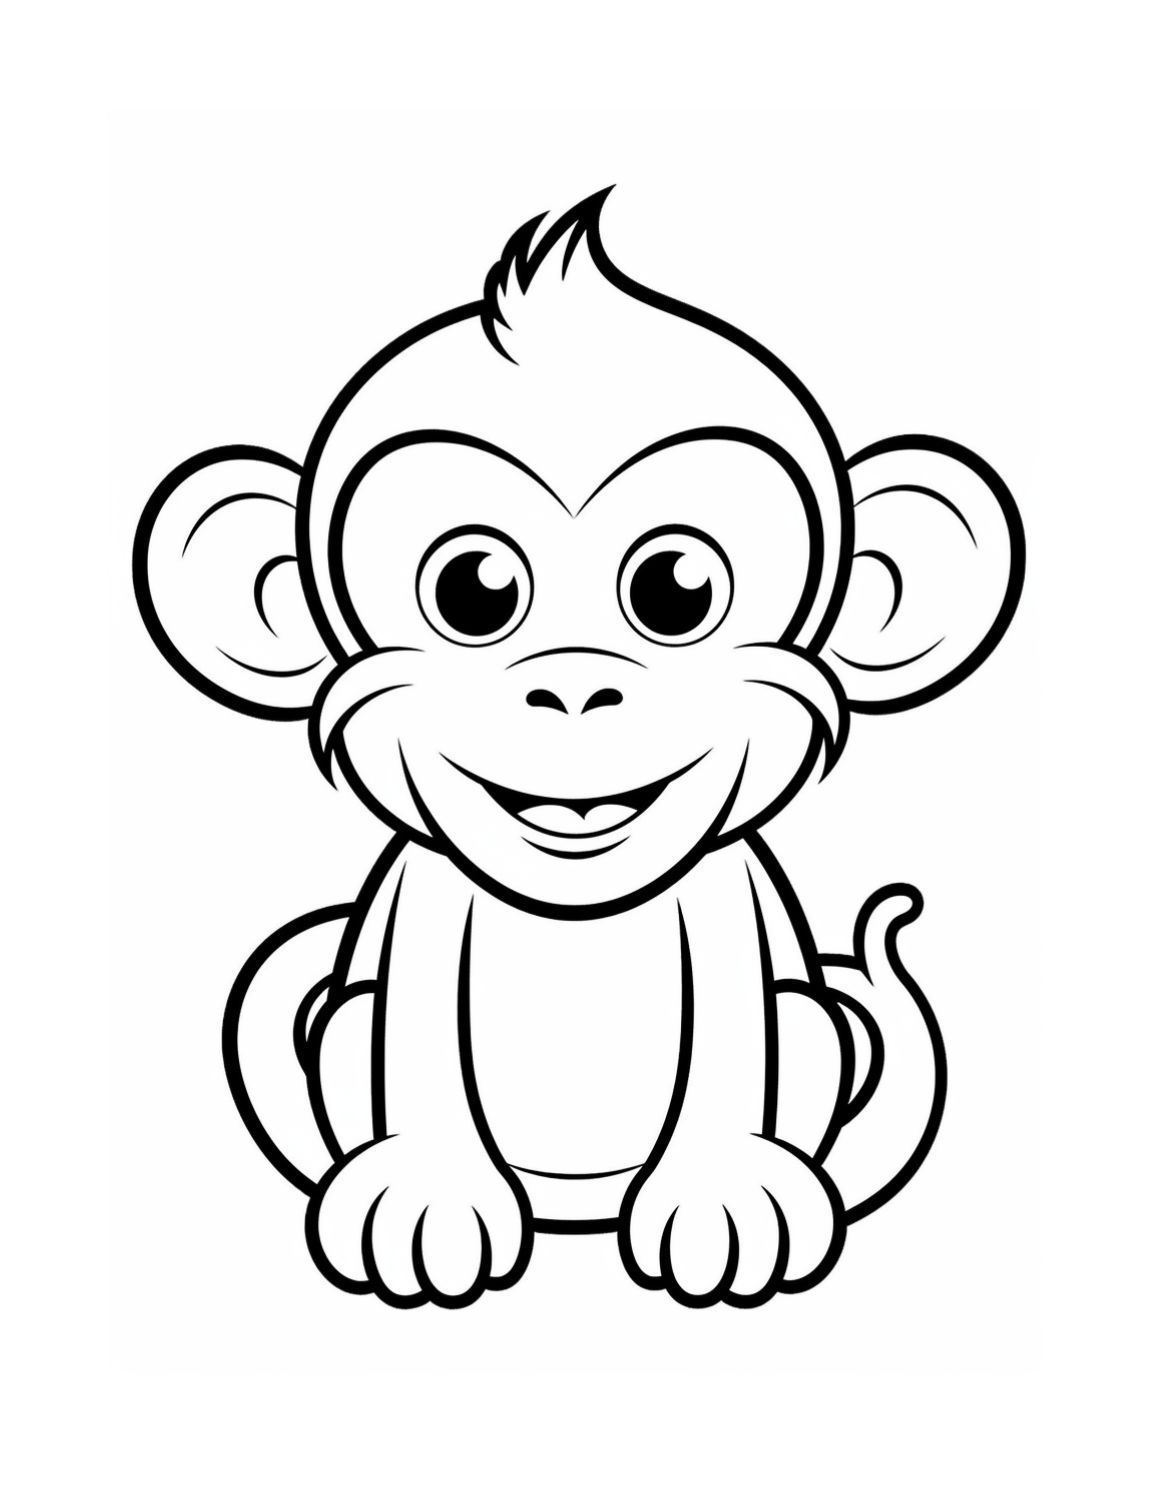 Free Printable Monkey Coloring Pages | Skip To My Lou with regard to Free Printable Monkey Coloring Sheets